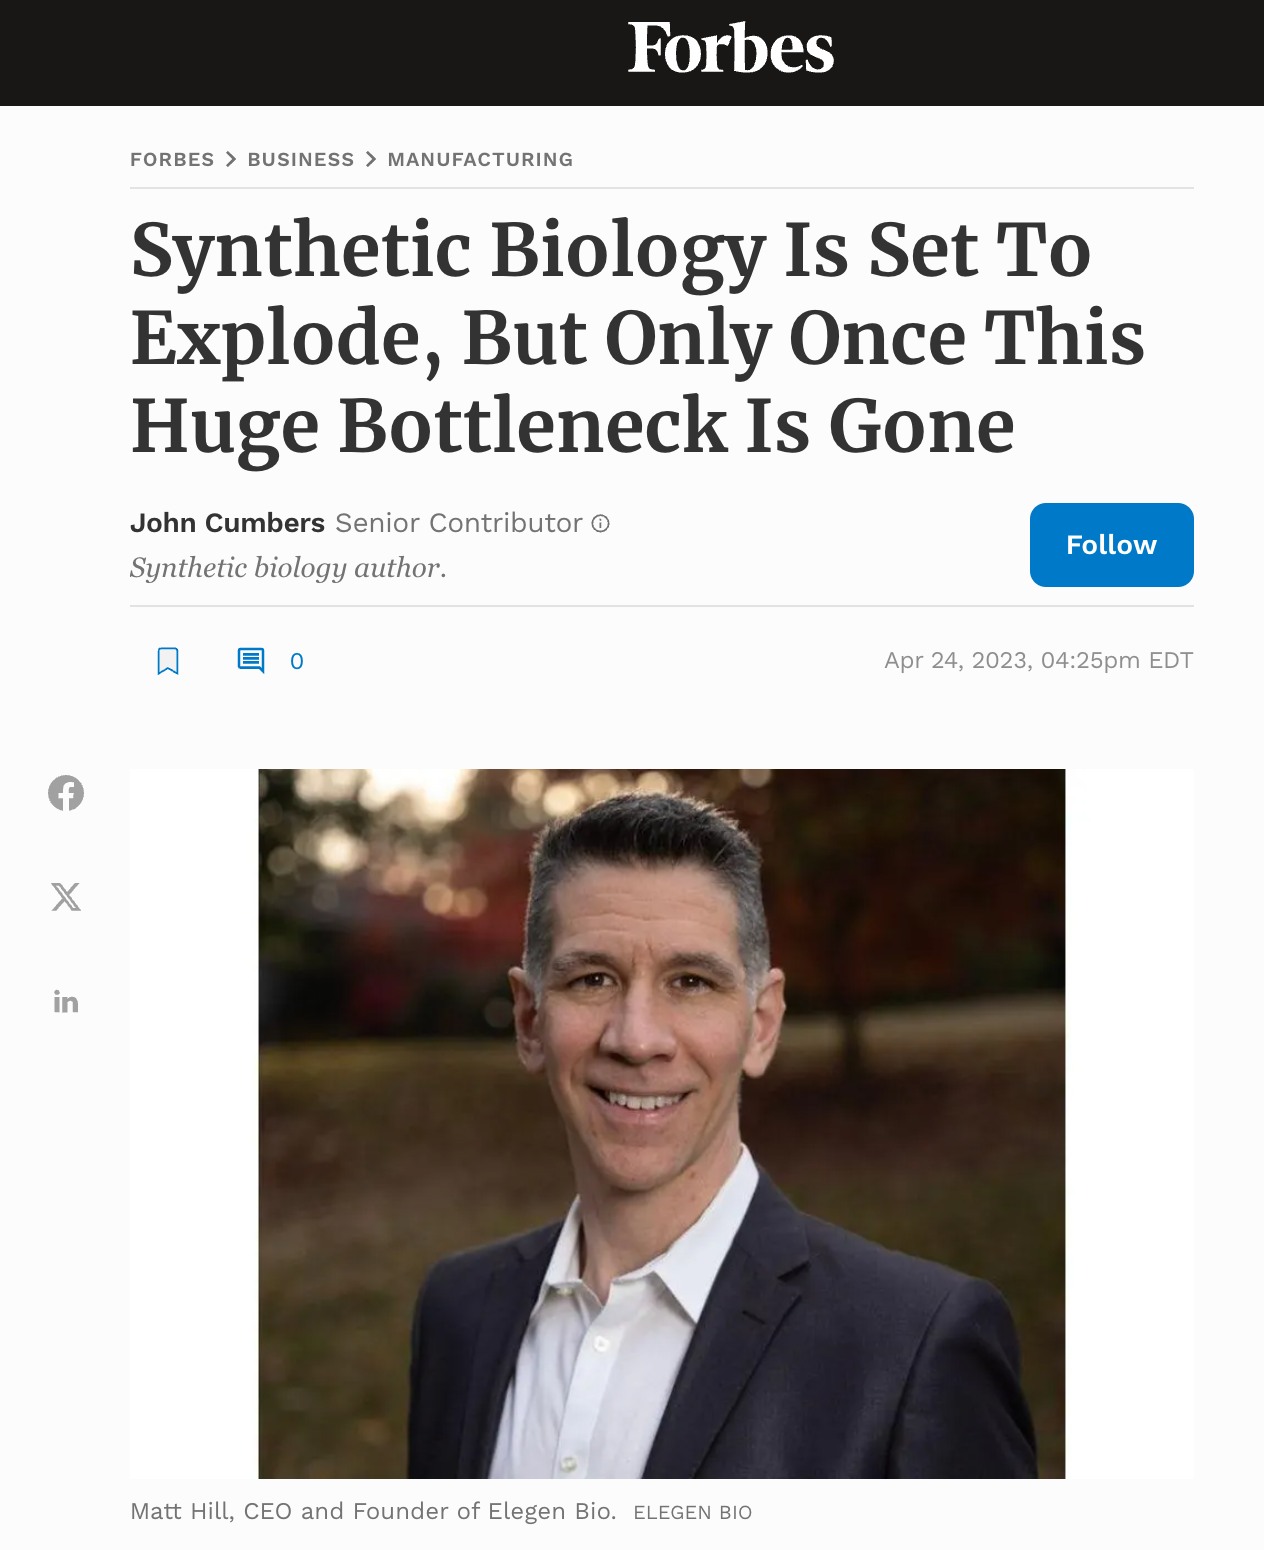 Synthetic Biology Is Set To Explode, But Only Once This Huge Bottleneck Is Gone